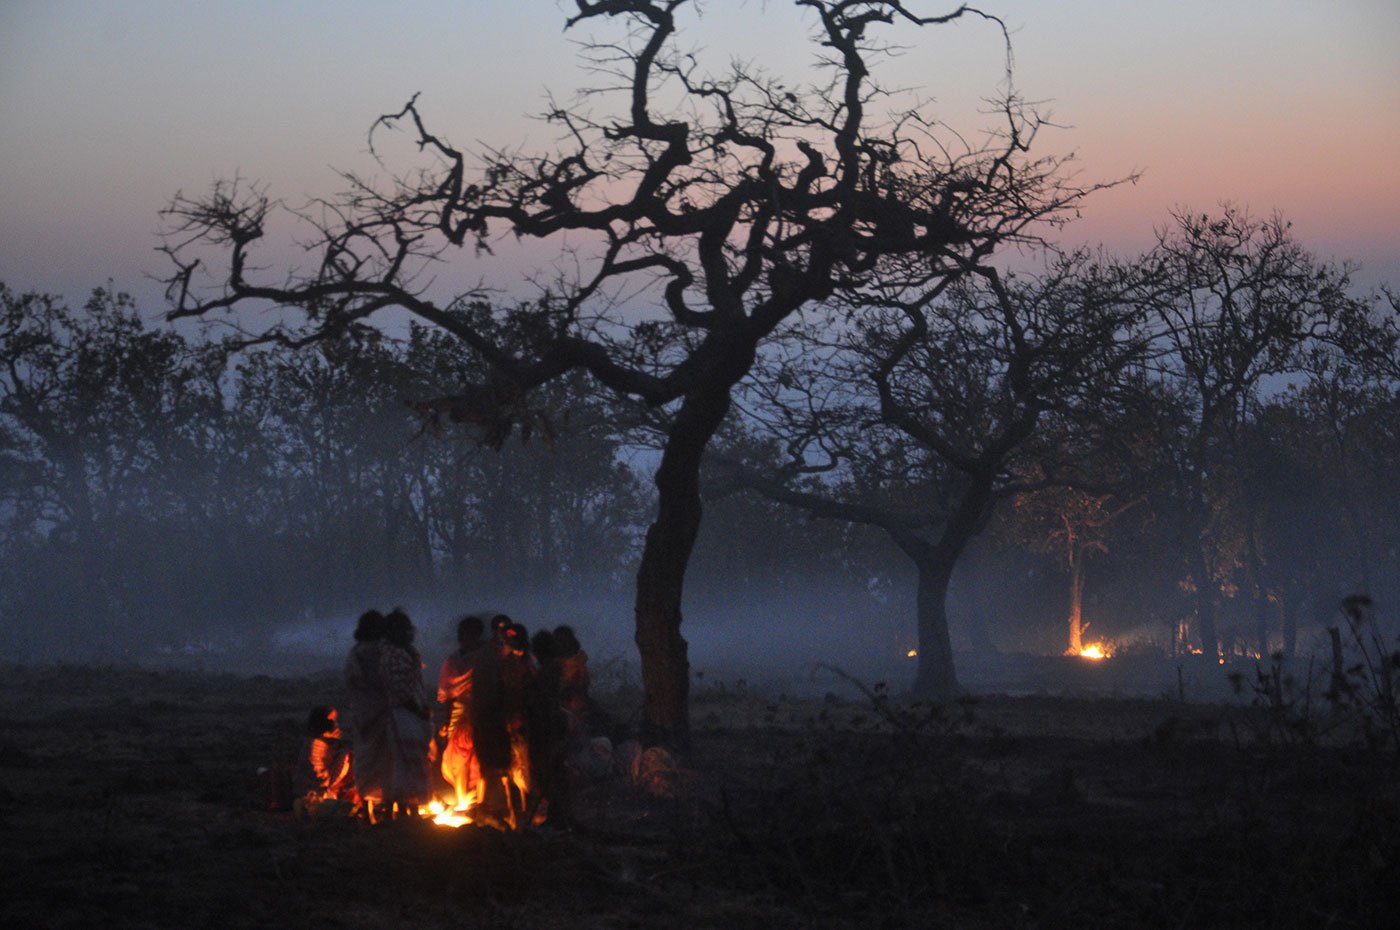 Tribals huddled next to a campfire in the evening